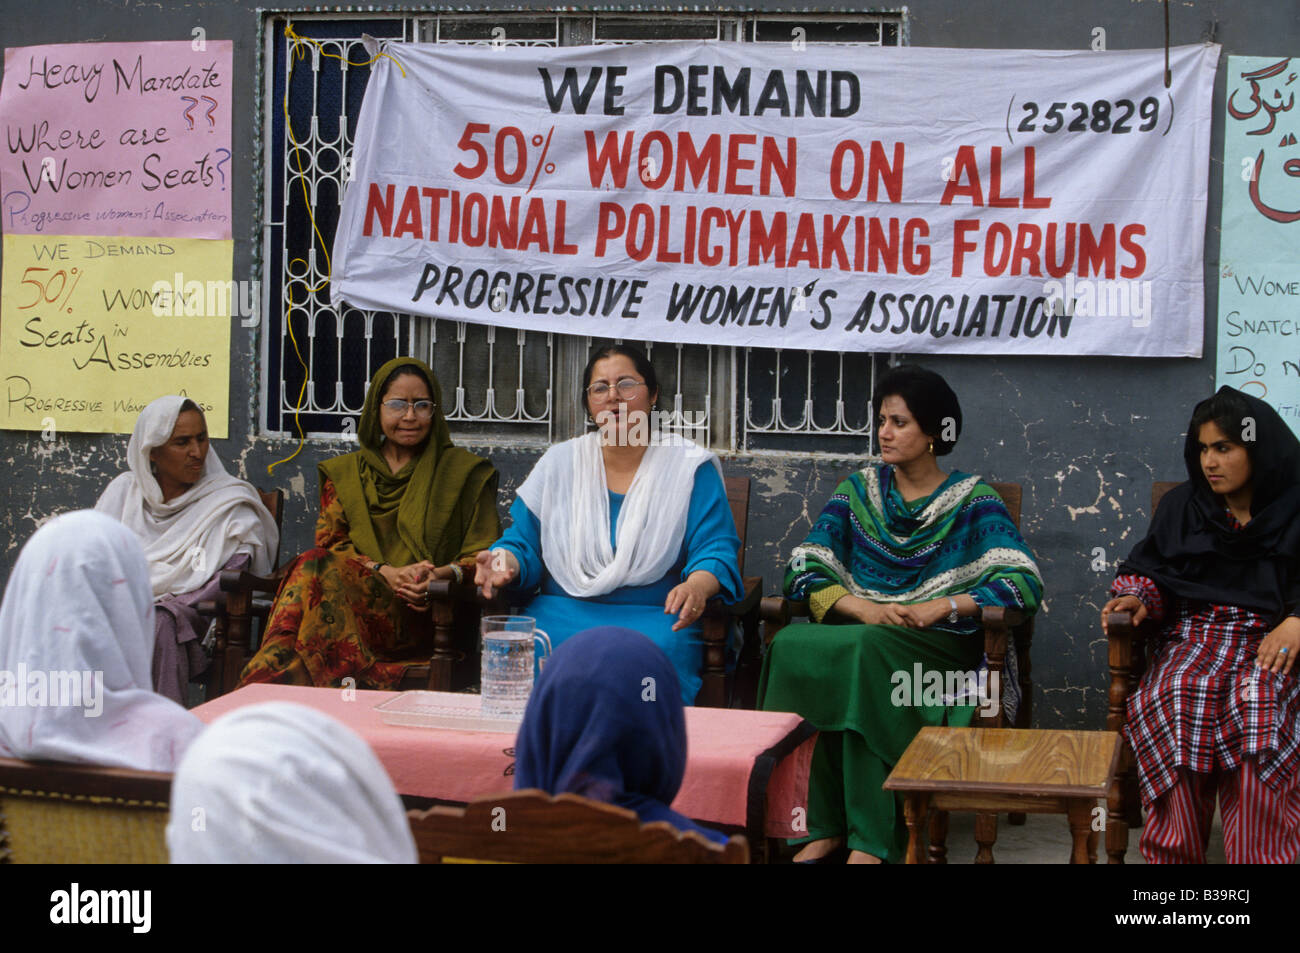 A women's group holds a public meeting demanding equal politcal rights in Islamabad Pakistan. Stock Photo